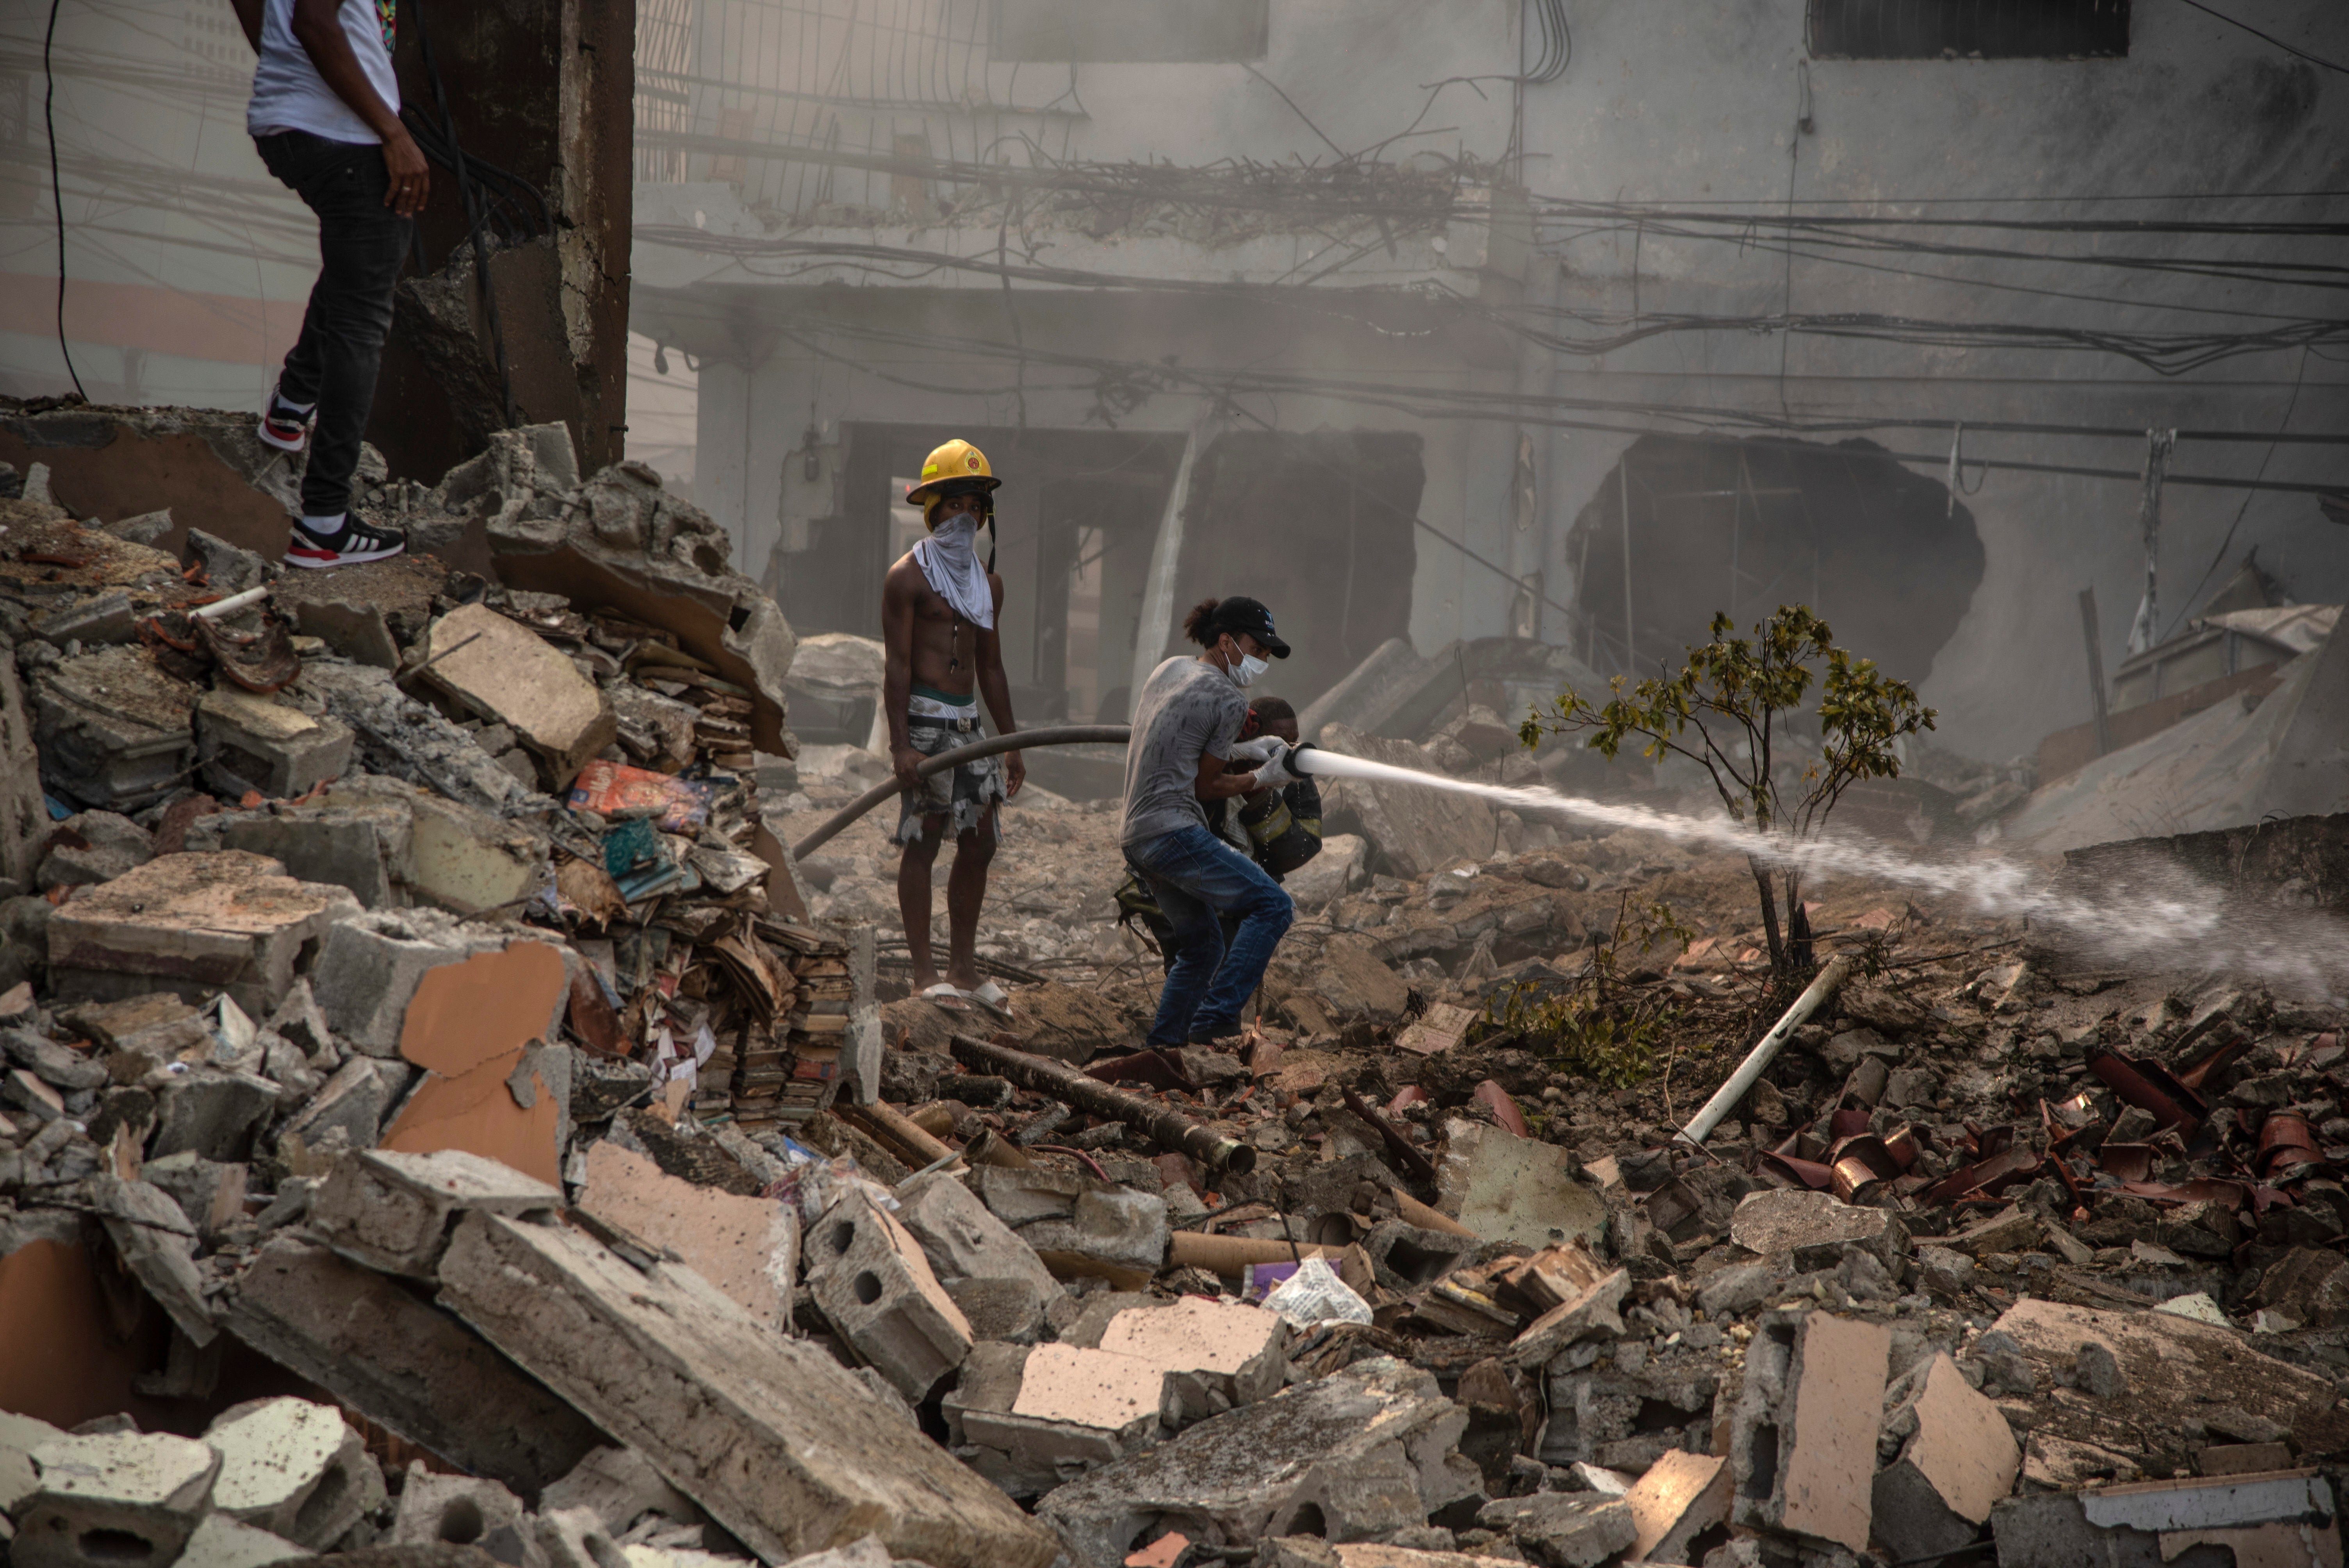 <p>Firefighters put out a fire after a powerful explosion in San Cristobal, Dominican Republic, Monday, Aug 14, 2023. The Monday afternoon explosion killed at least three people and injured more than 30 others, authorities said. </p>